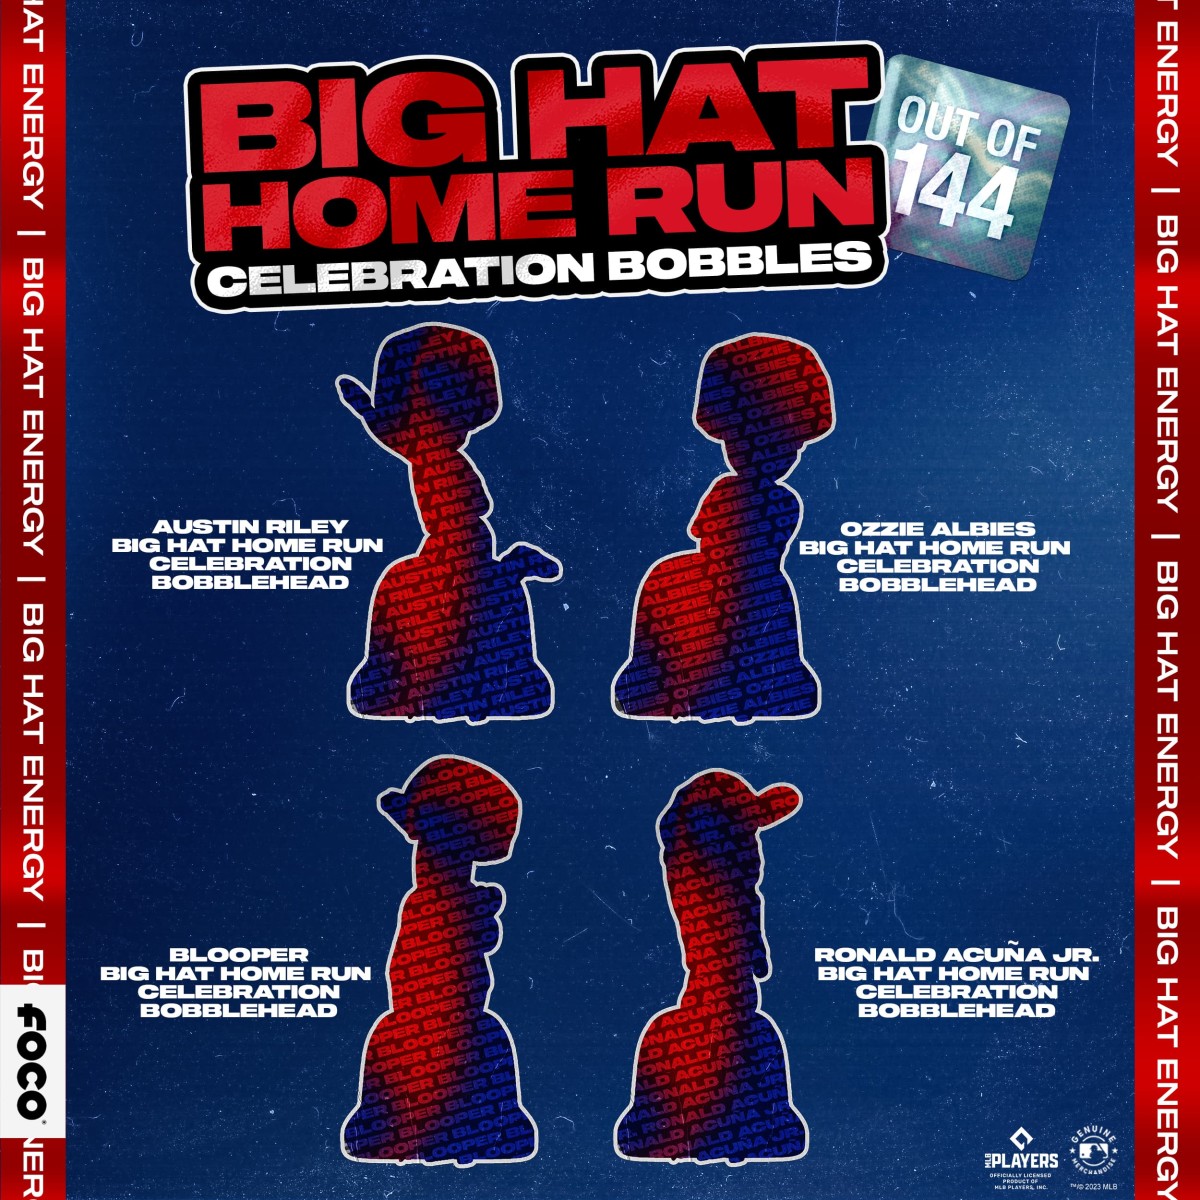 FOCO expands Big Hat Home Run celebration line of bobbleheads to include  Riley, Acuña, Ozzie, and Blooper - Sports Illustrated Atlanta Braves News,  Analysis and More